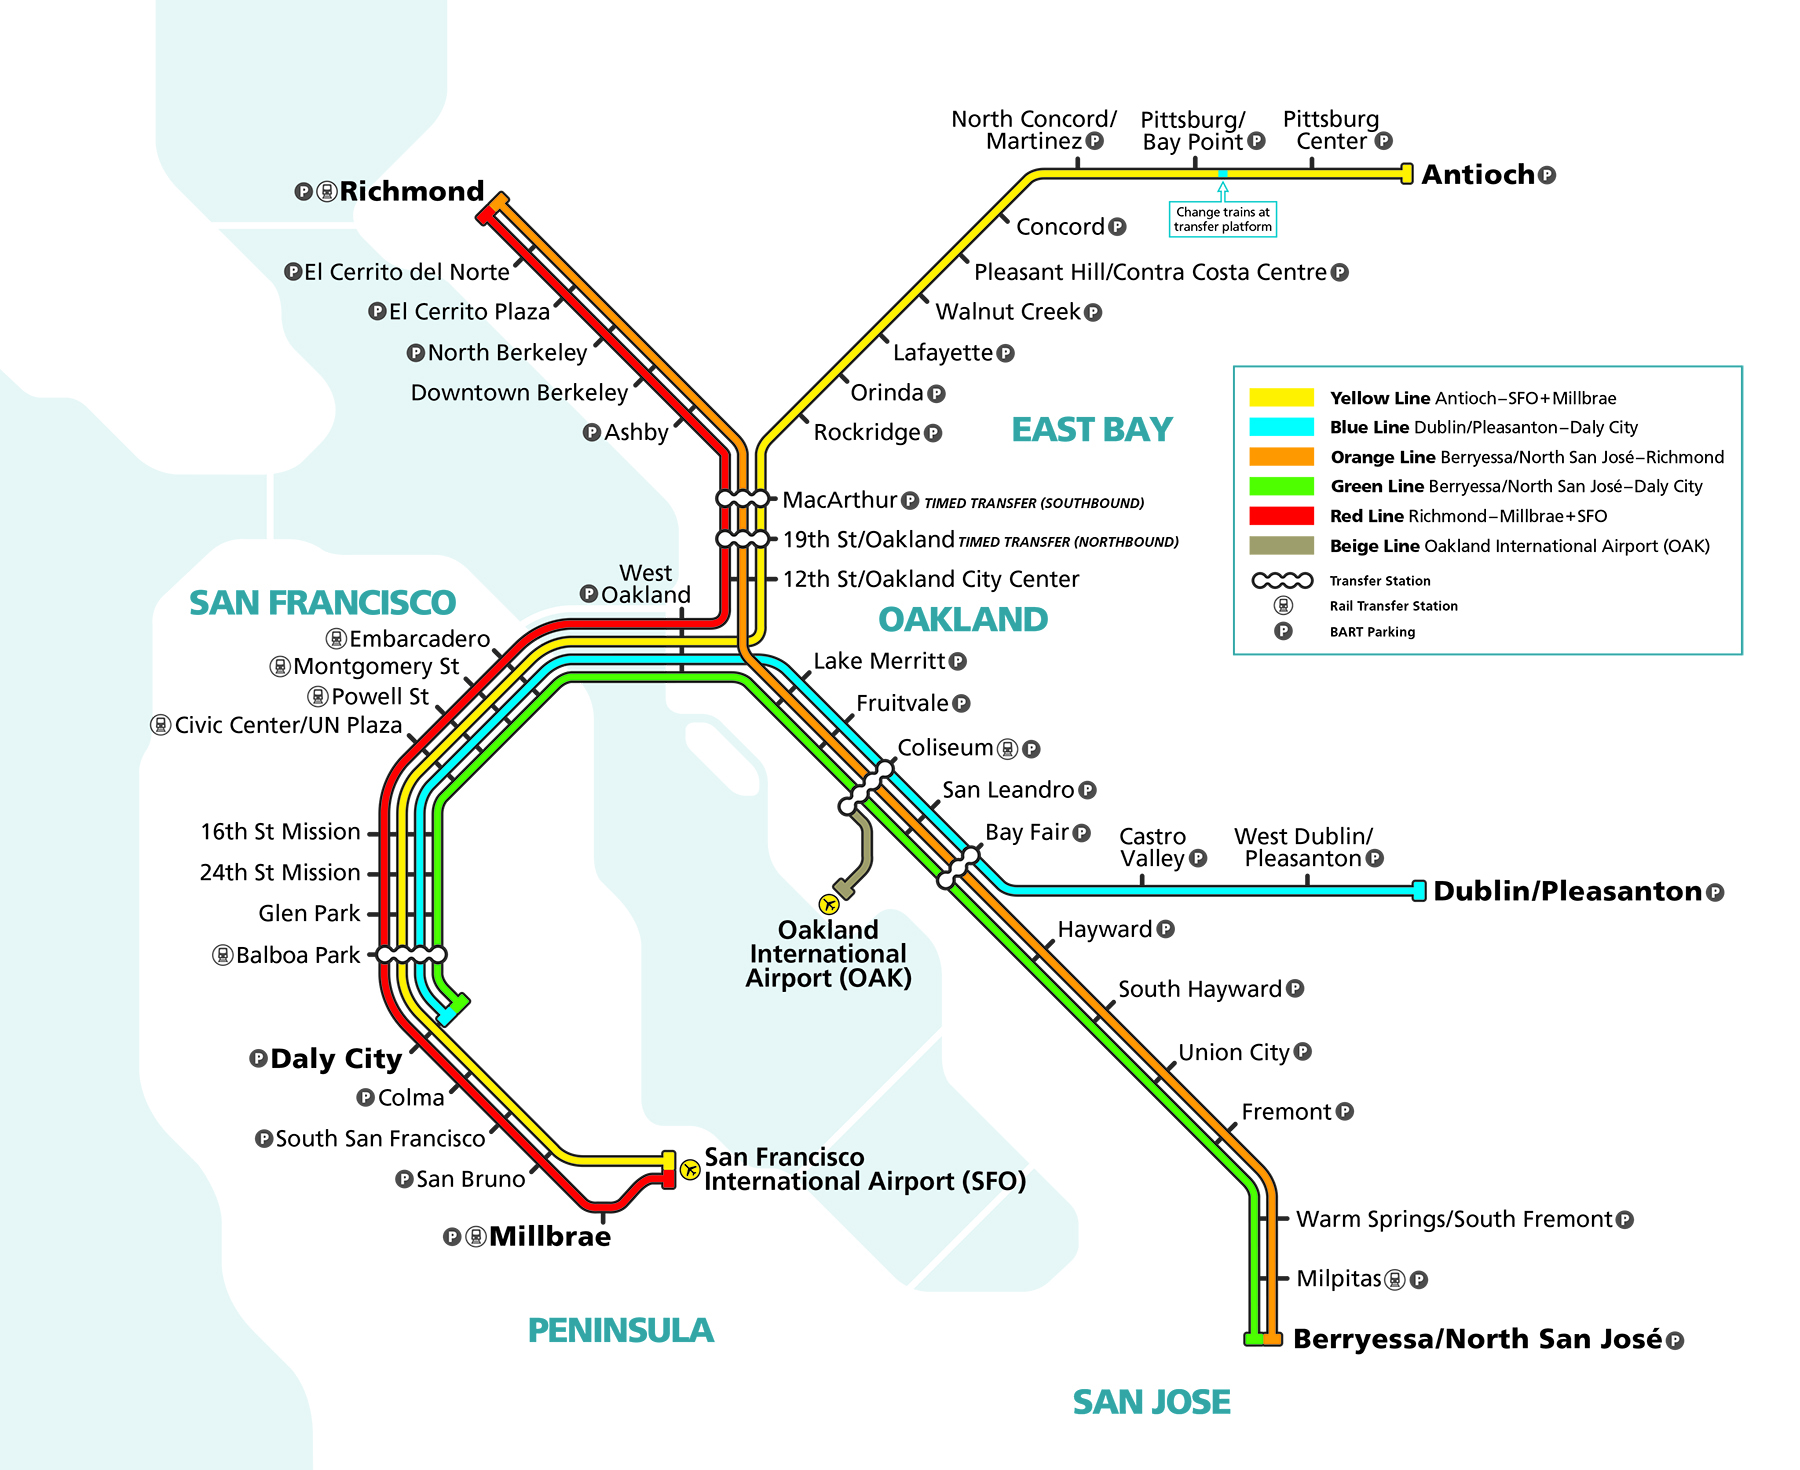 Map shows the BART transit system in present day